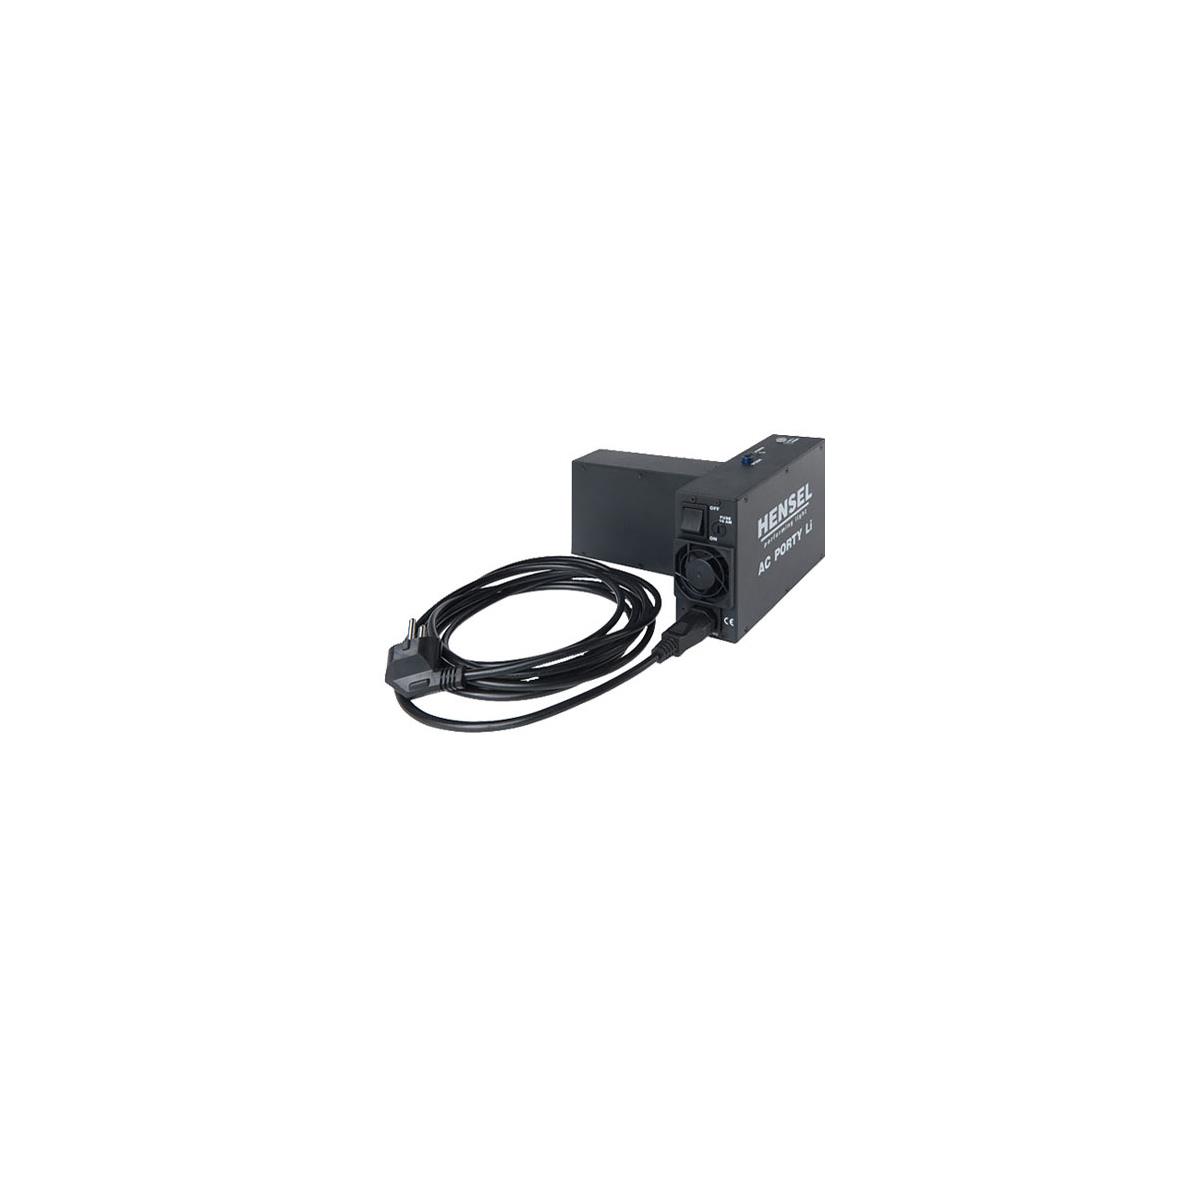 Image of Hensel AC Porty Mains Adapter Drawer for L 600/L 1200